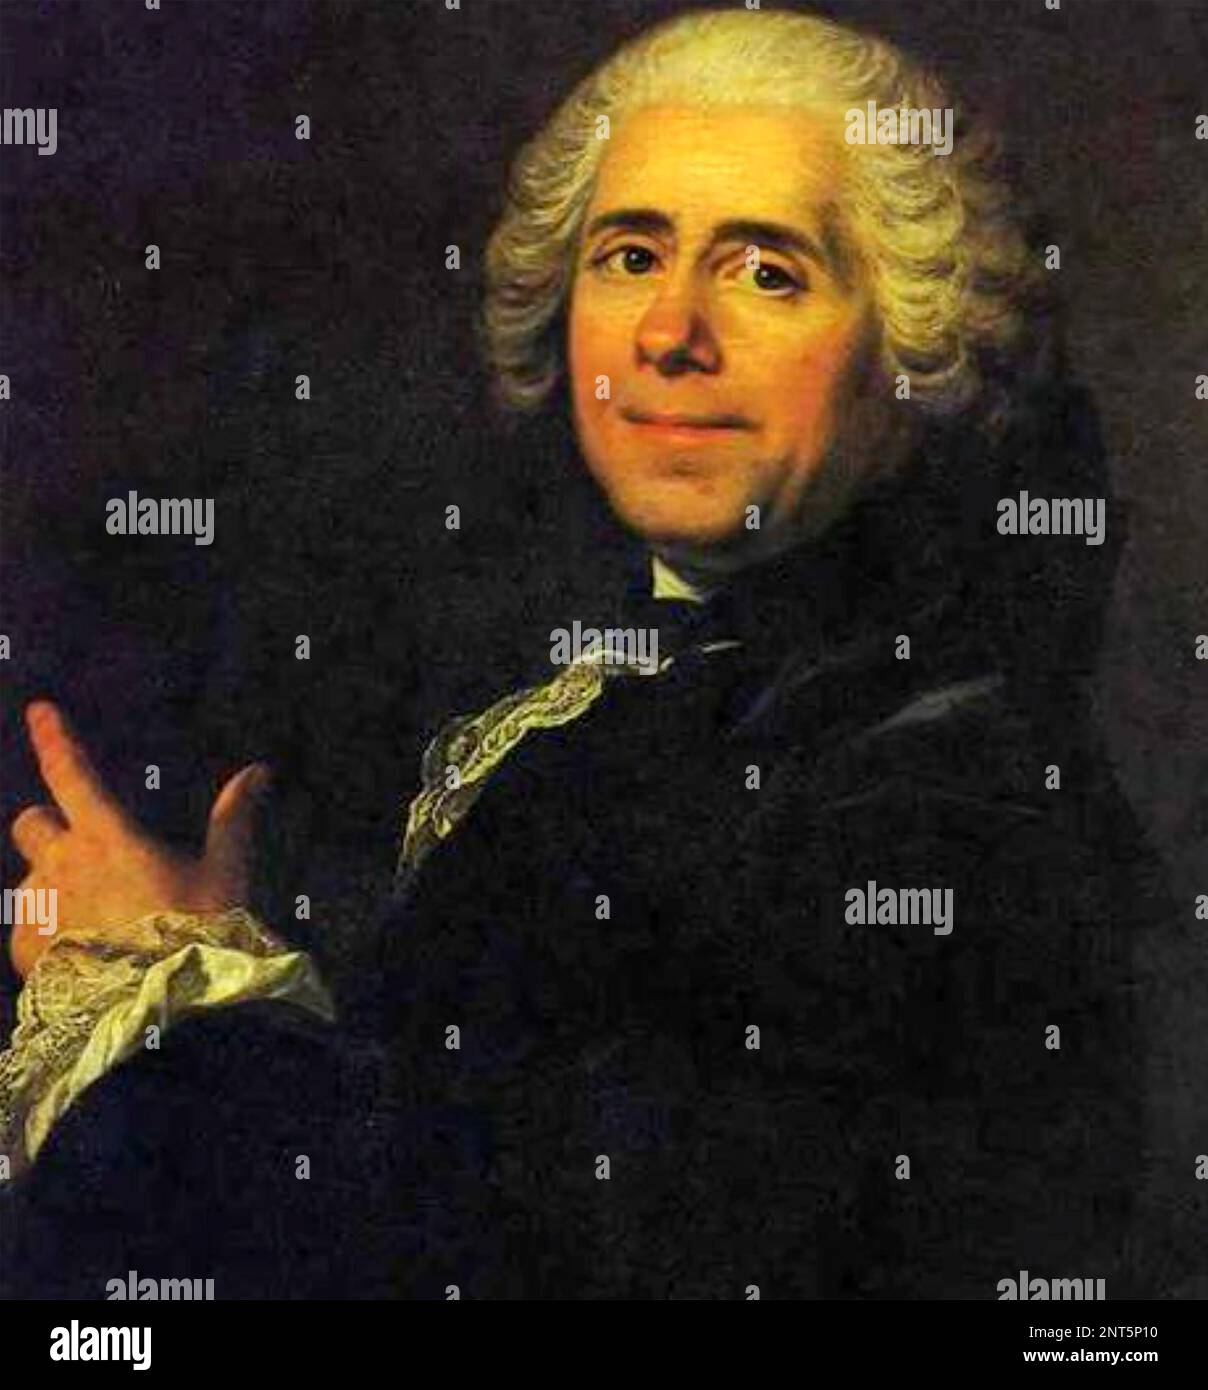 PIERRE de MARIVAUX (1688-1763) French playwright and novelist Stock Photo